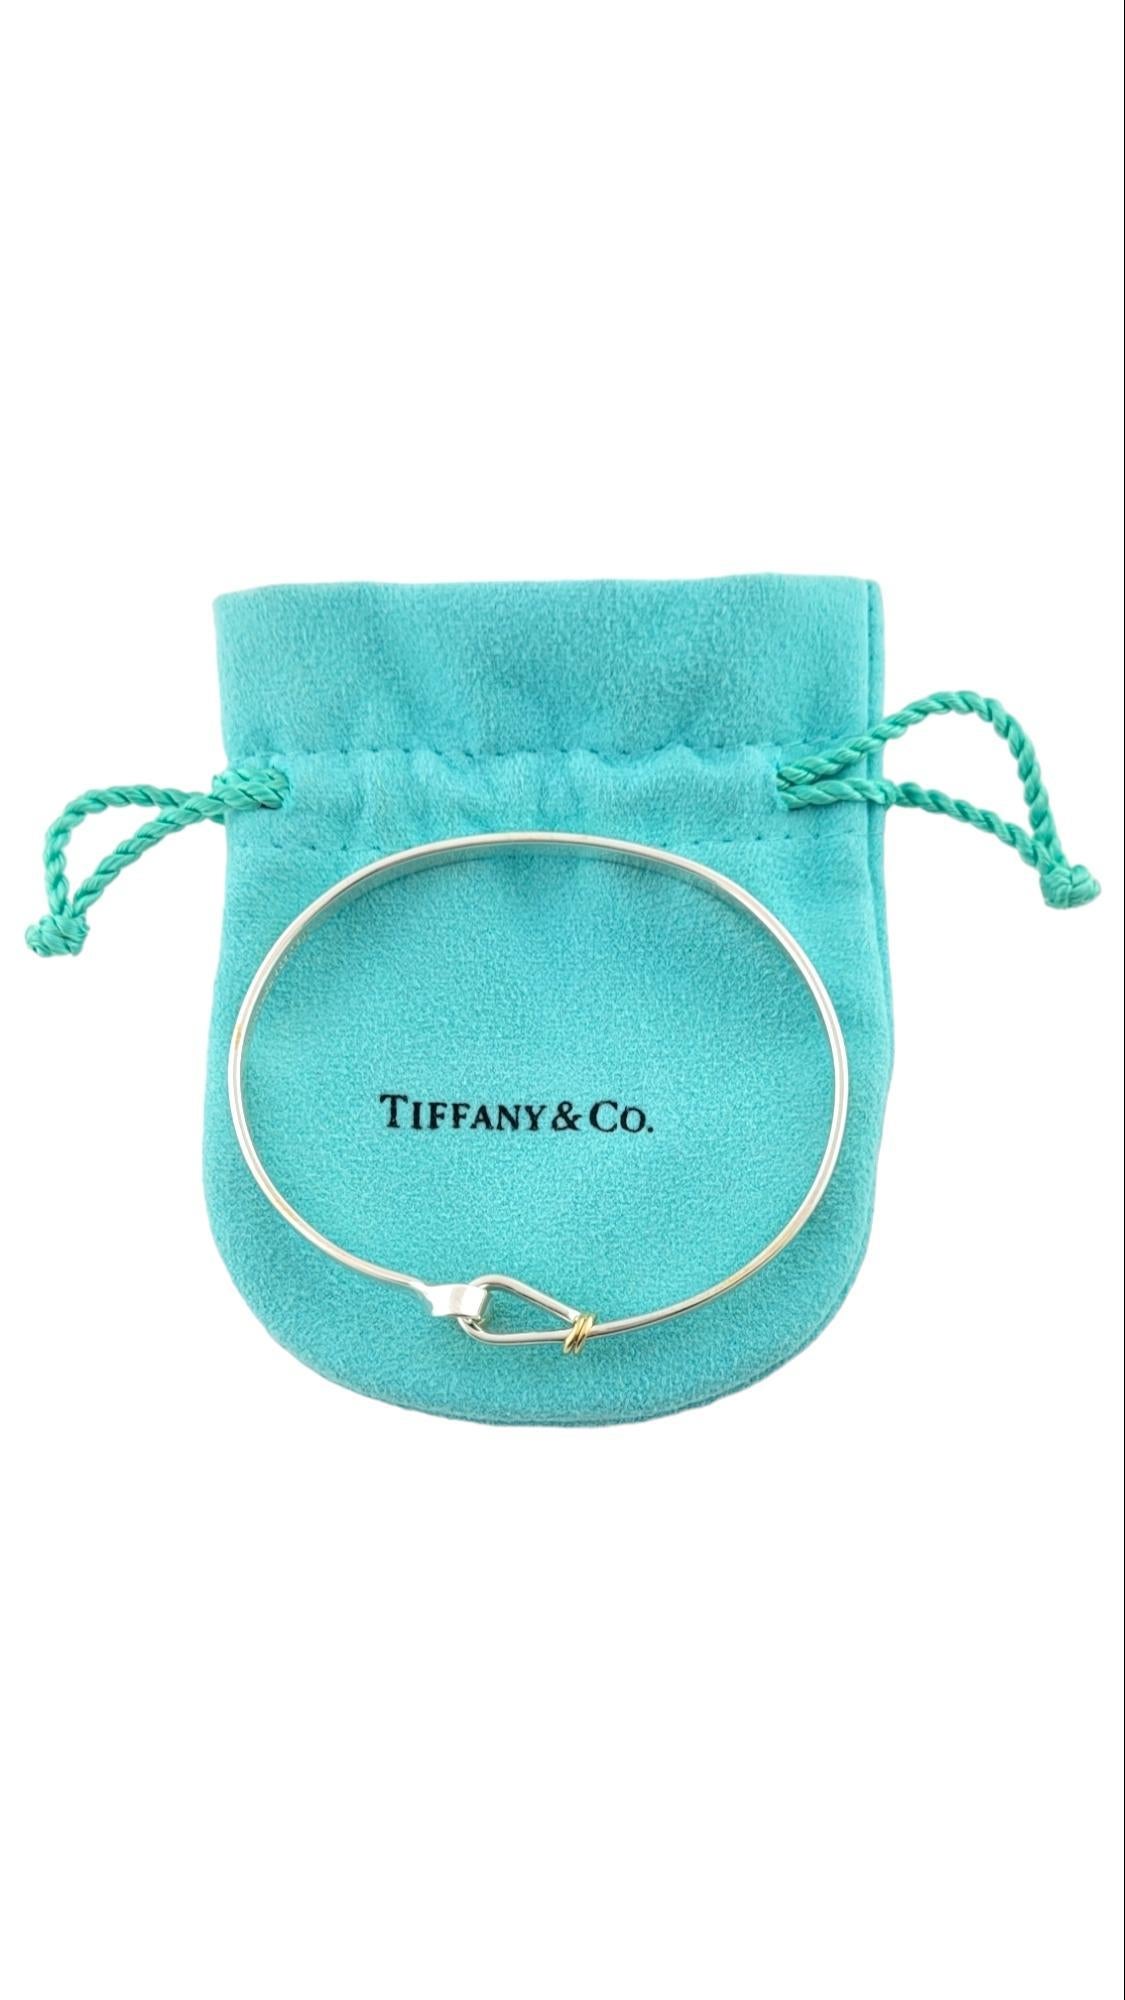 Tiffany & Co. Sterling Silver and 18K Gold Hook and Eye Bracelet #15820 1